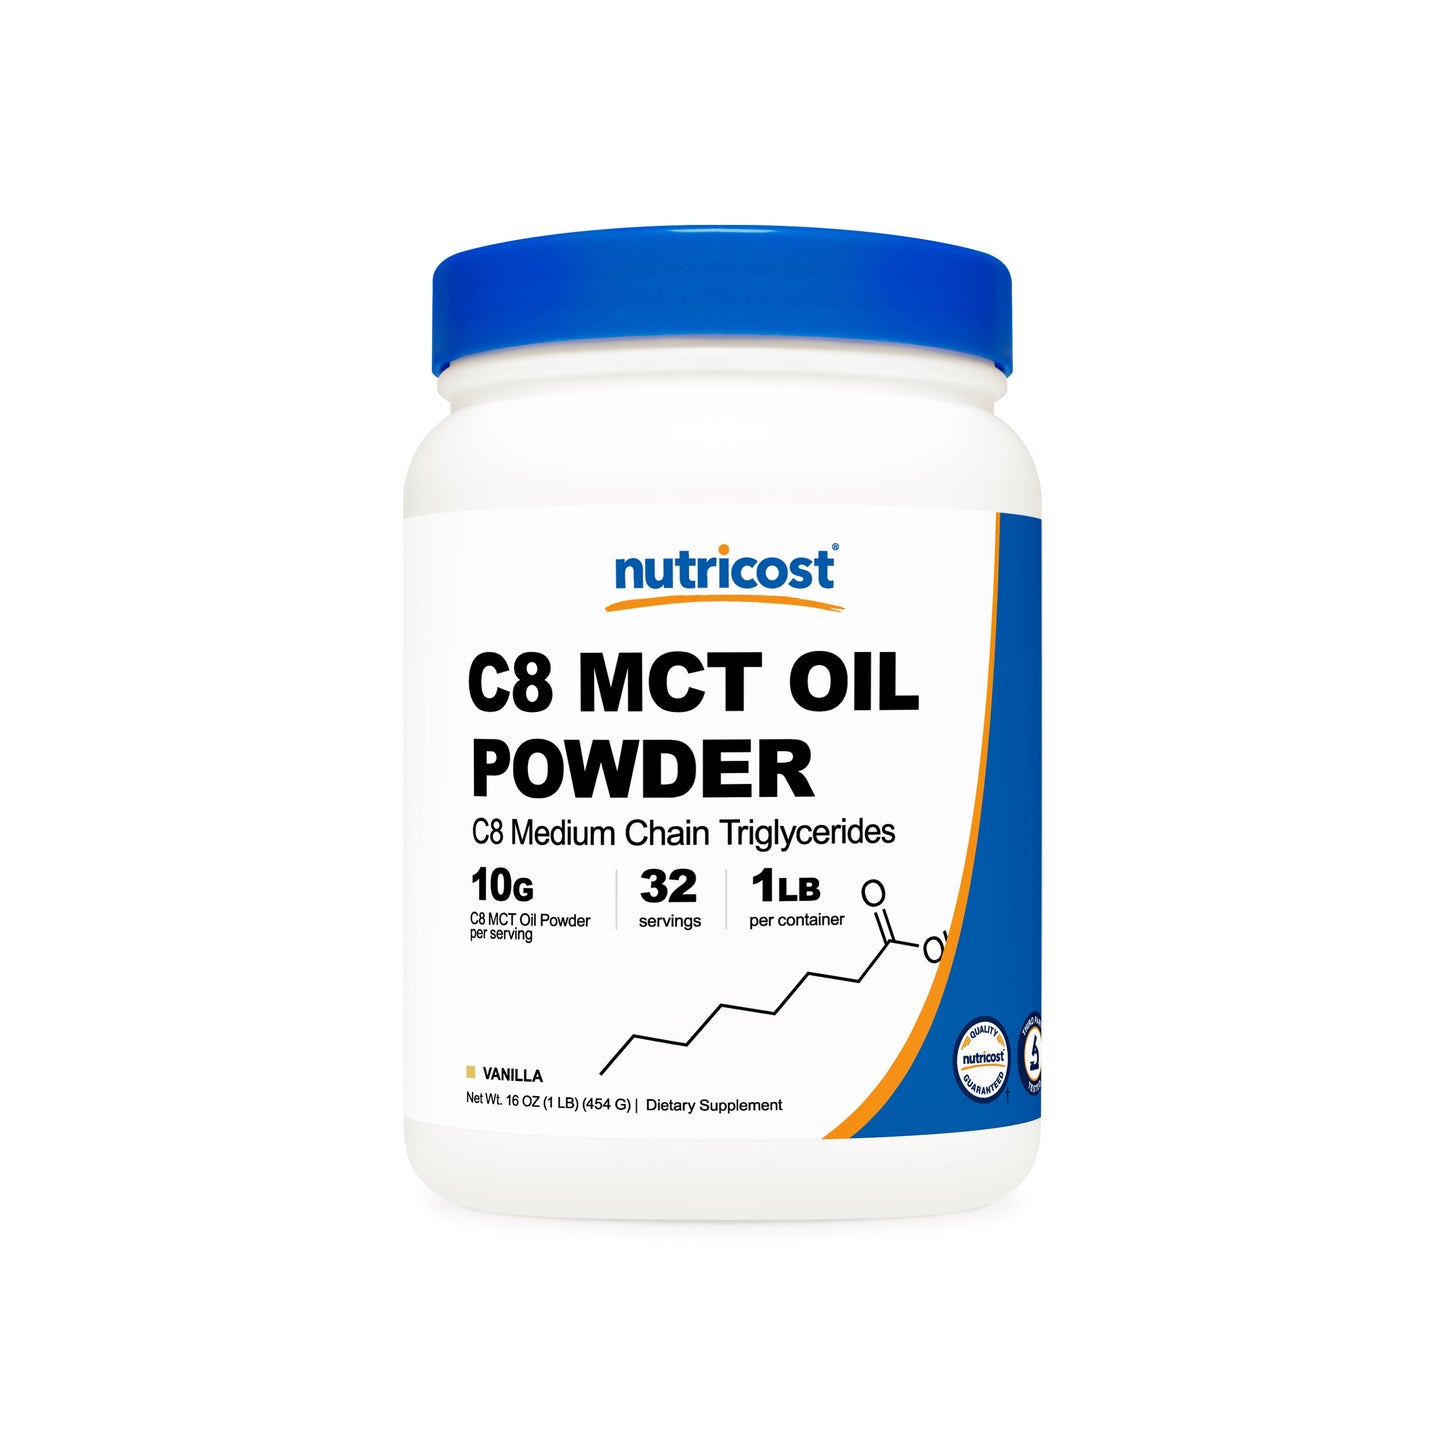 Nutricost C8 MCT Oil Powder